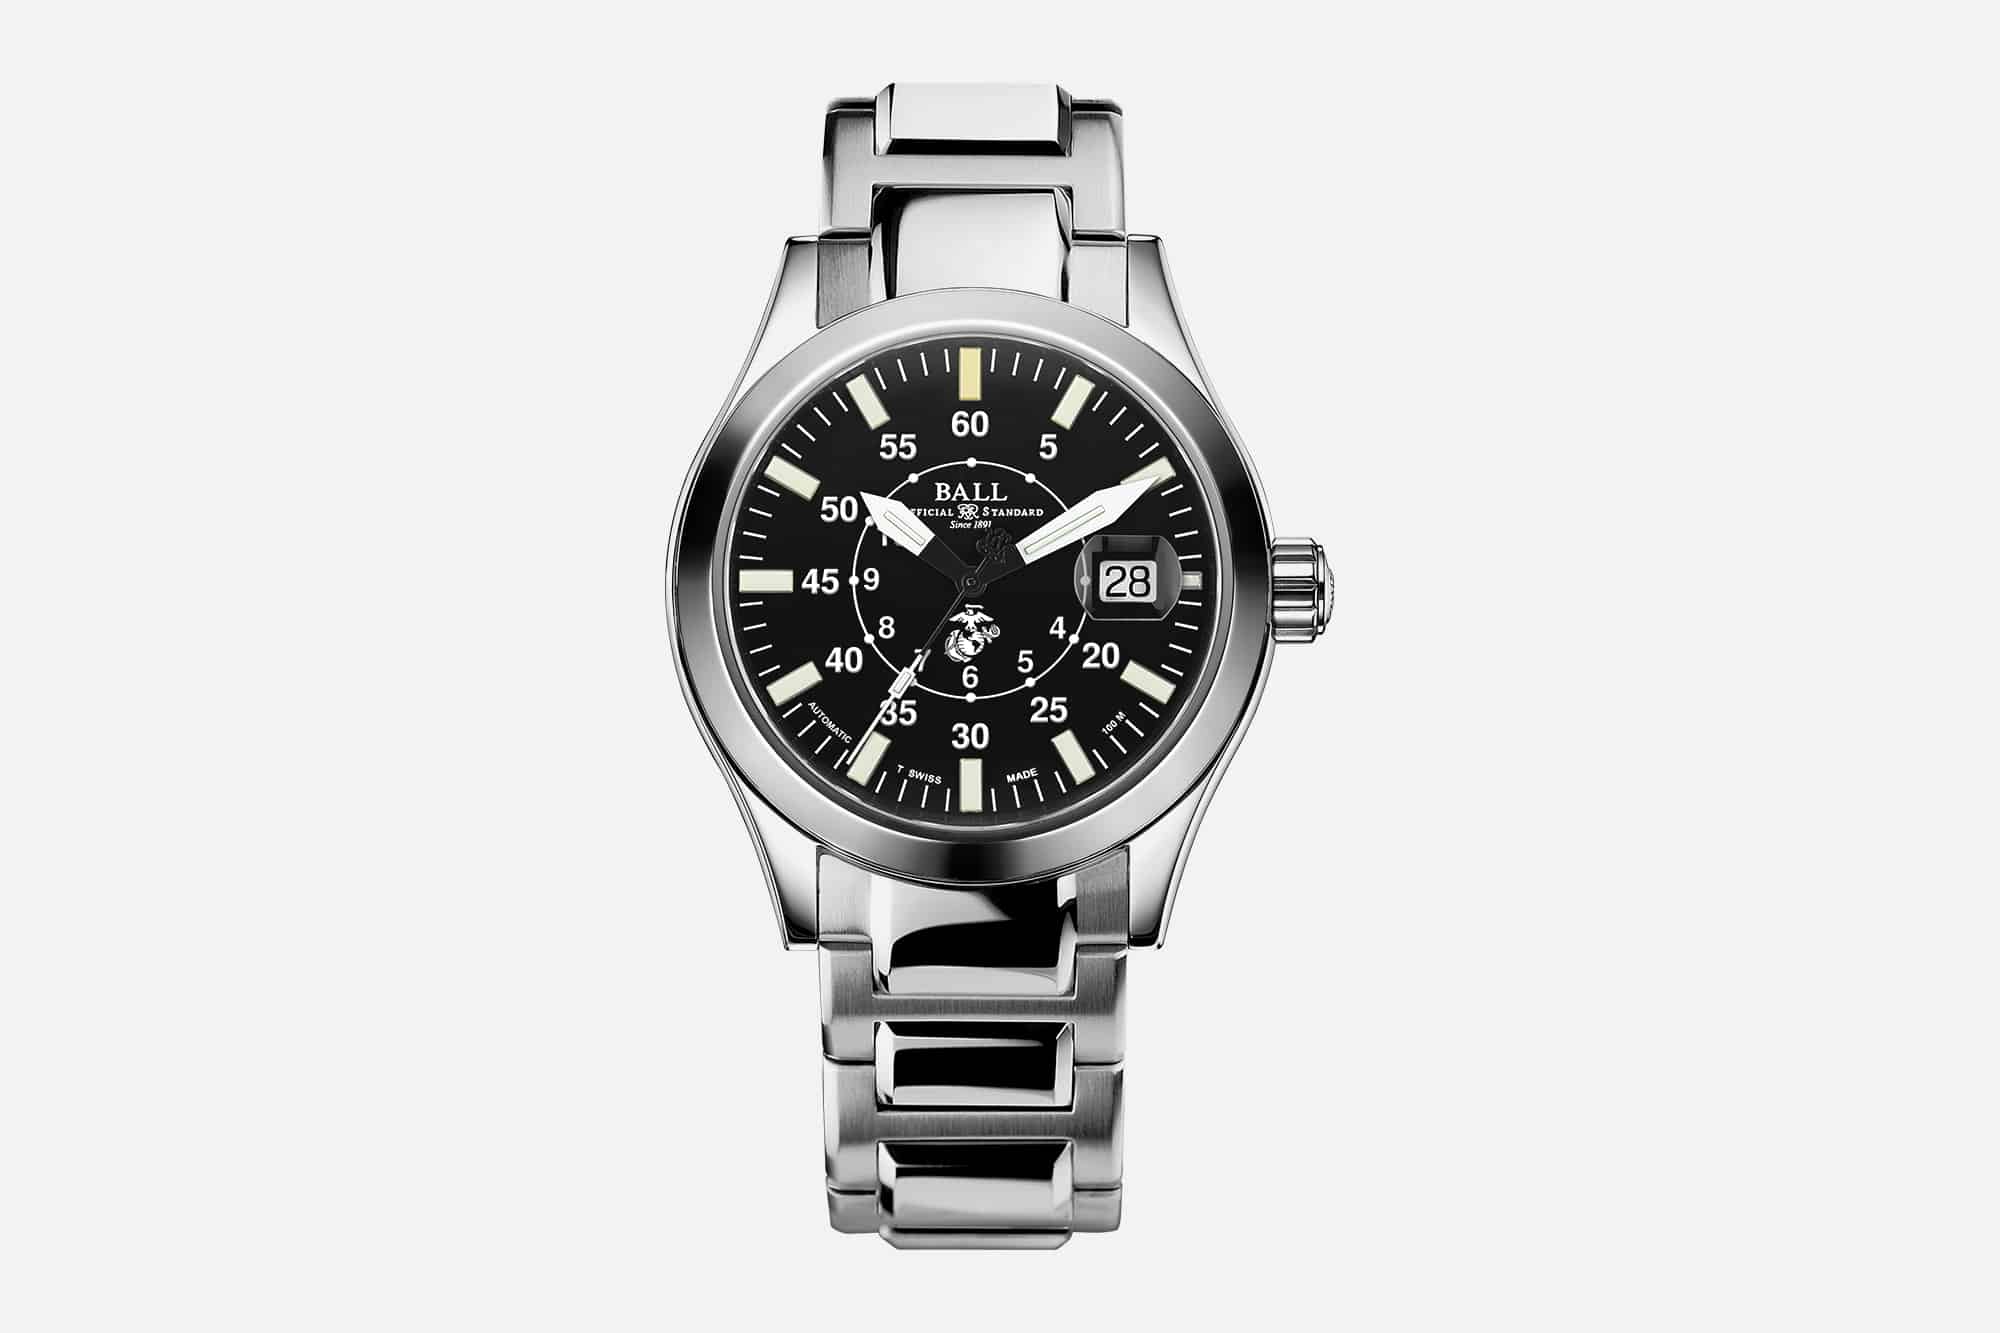 Ball Introduces New Watches in their Engineer II Line Paying Tribute to ...